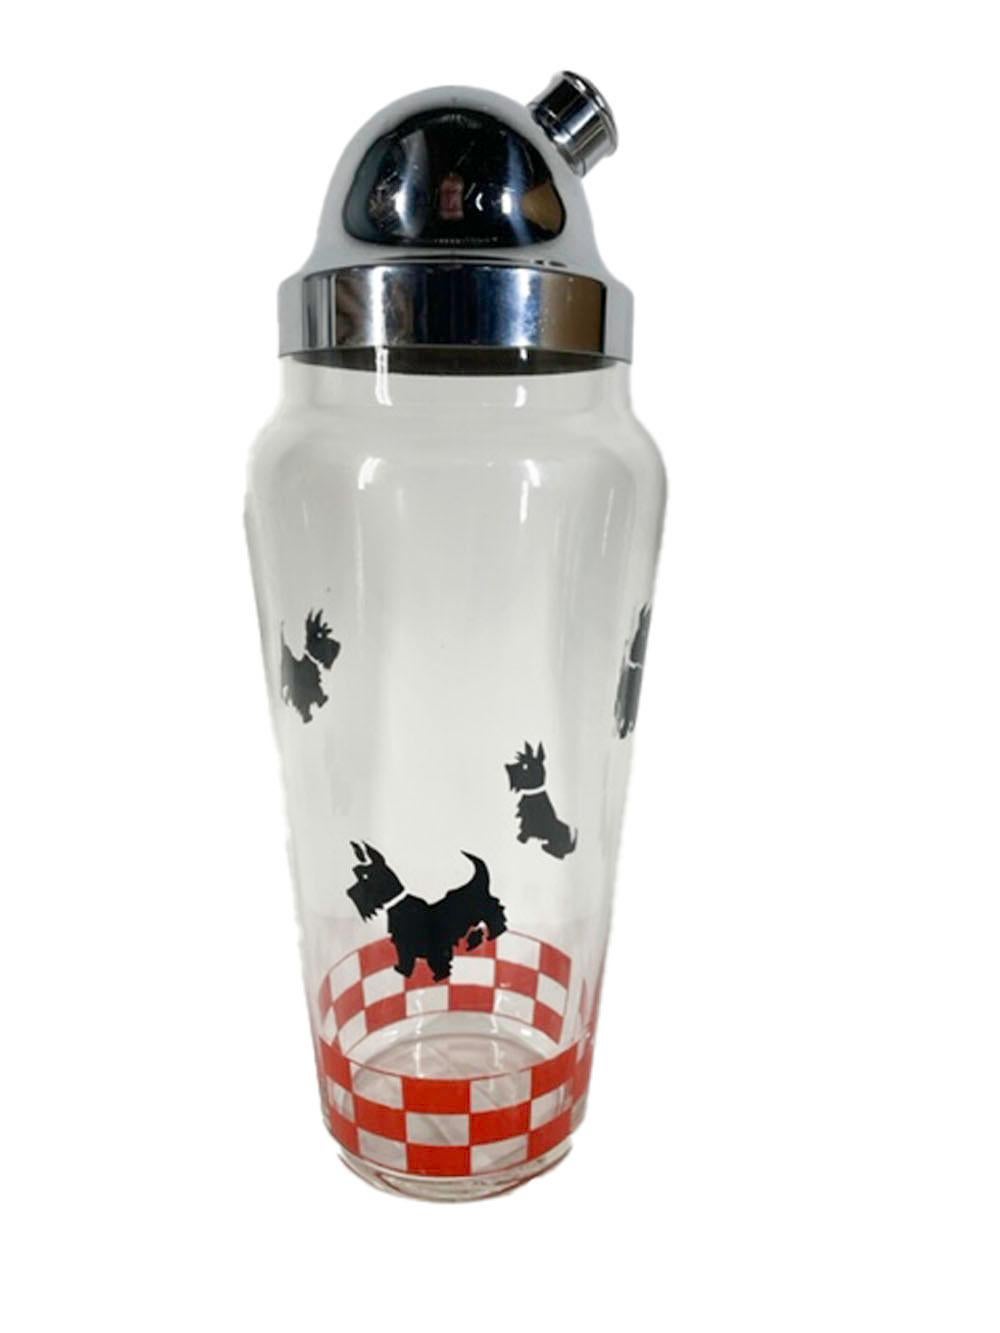 Art Deco, Hazel Atlas Cocktail Shaker with Black Scotties and Red Check Band In Good Condition For Sale In Nantucket, MA